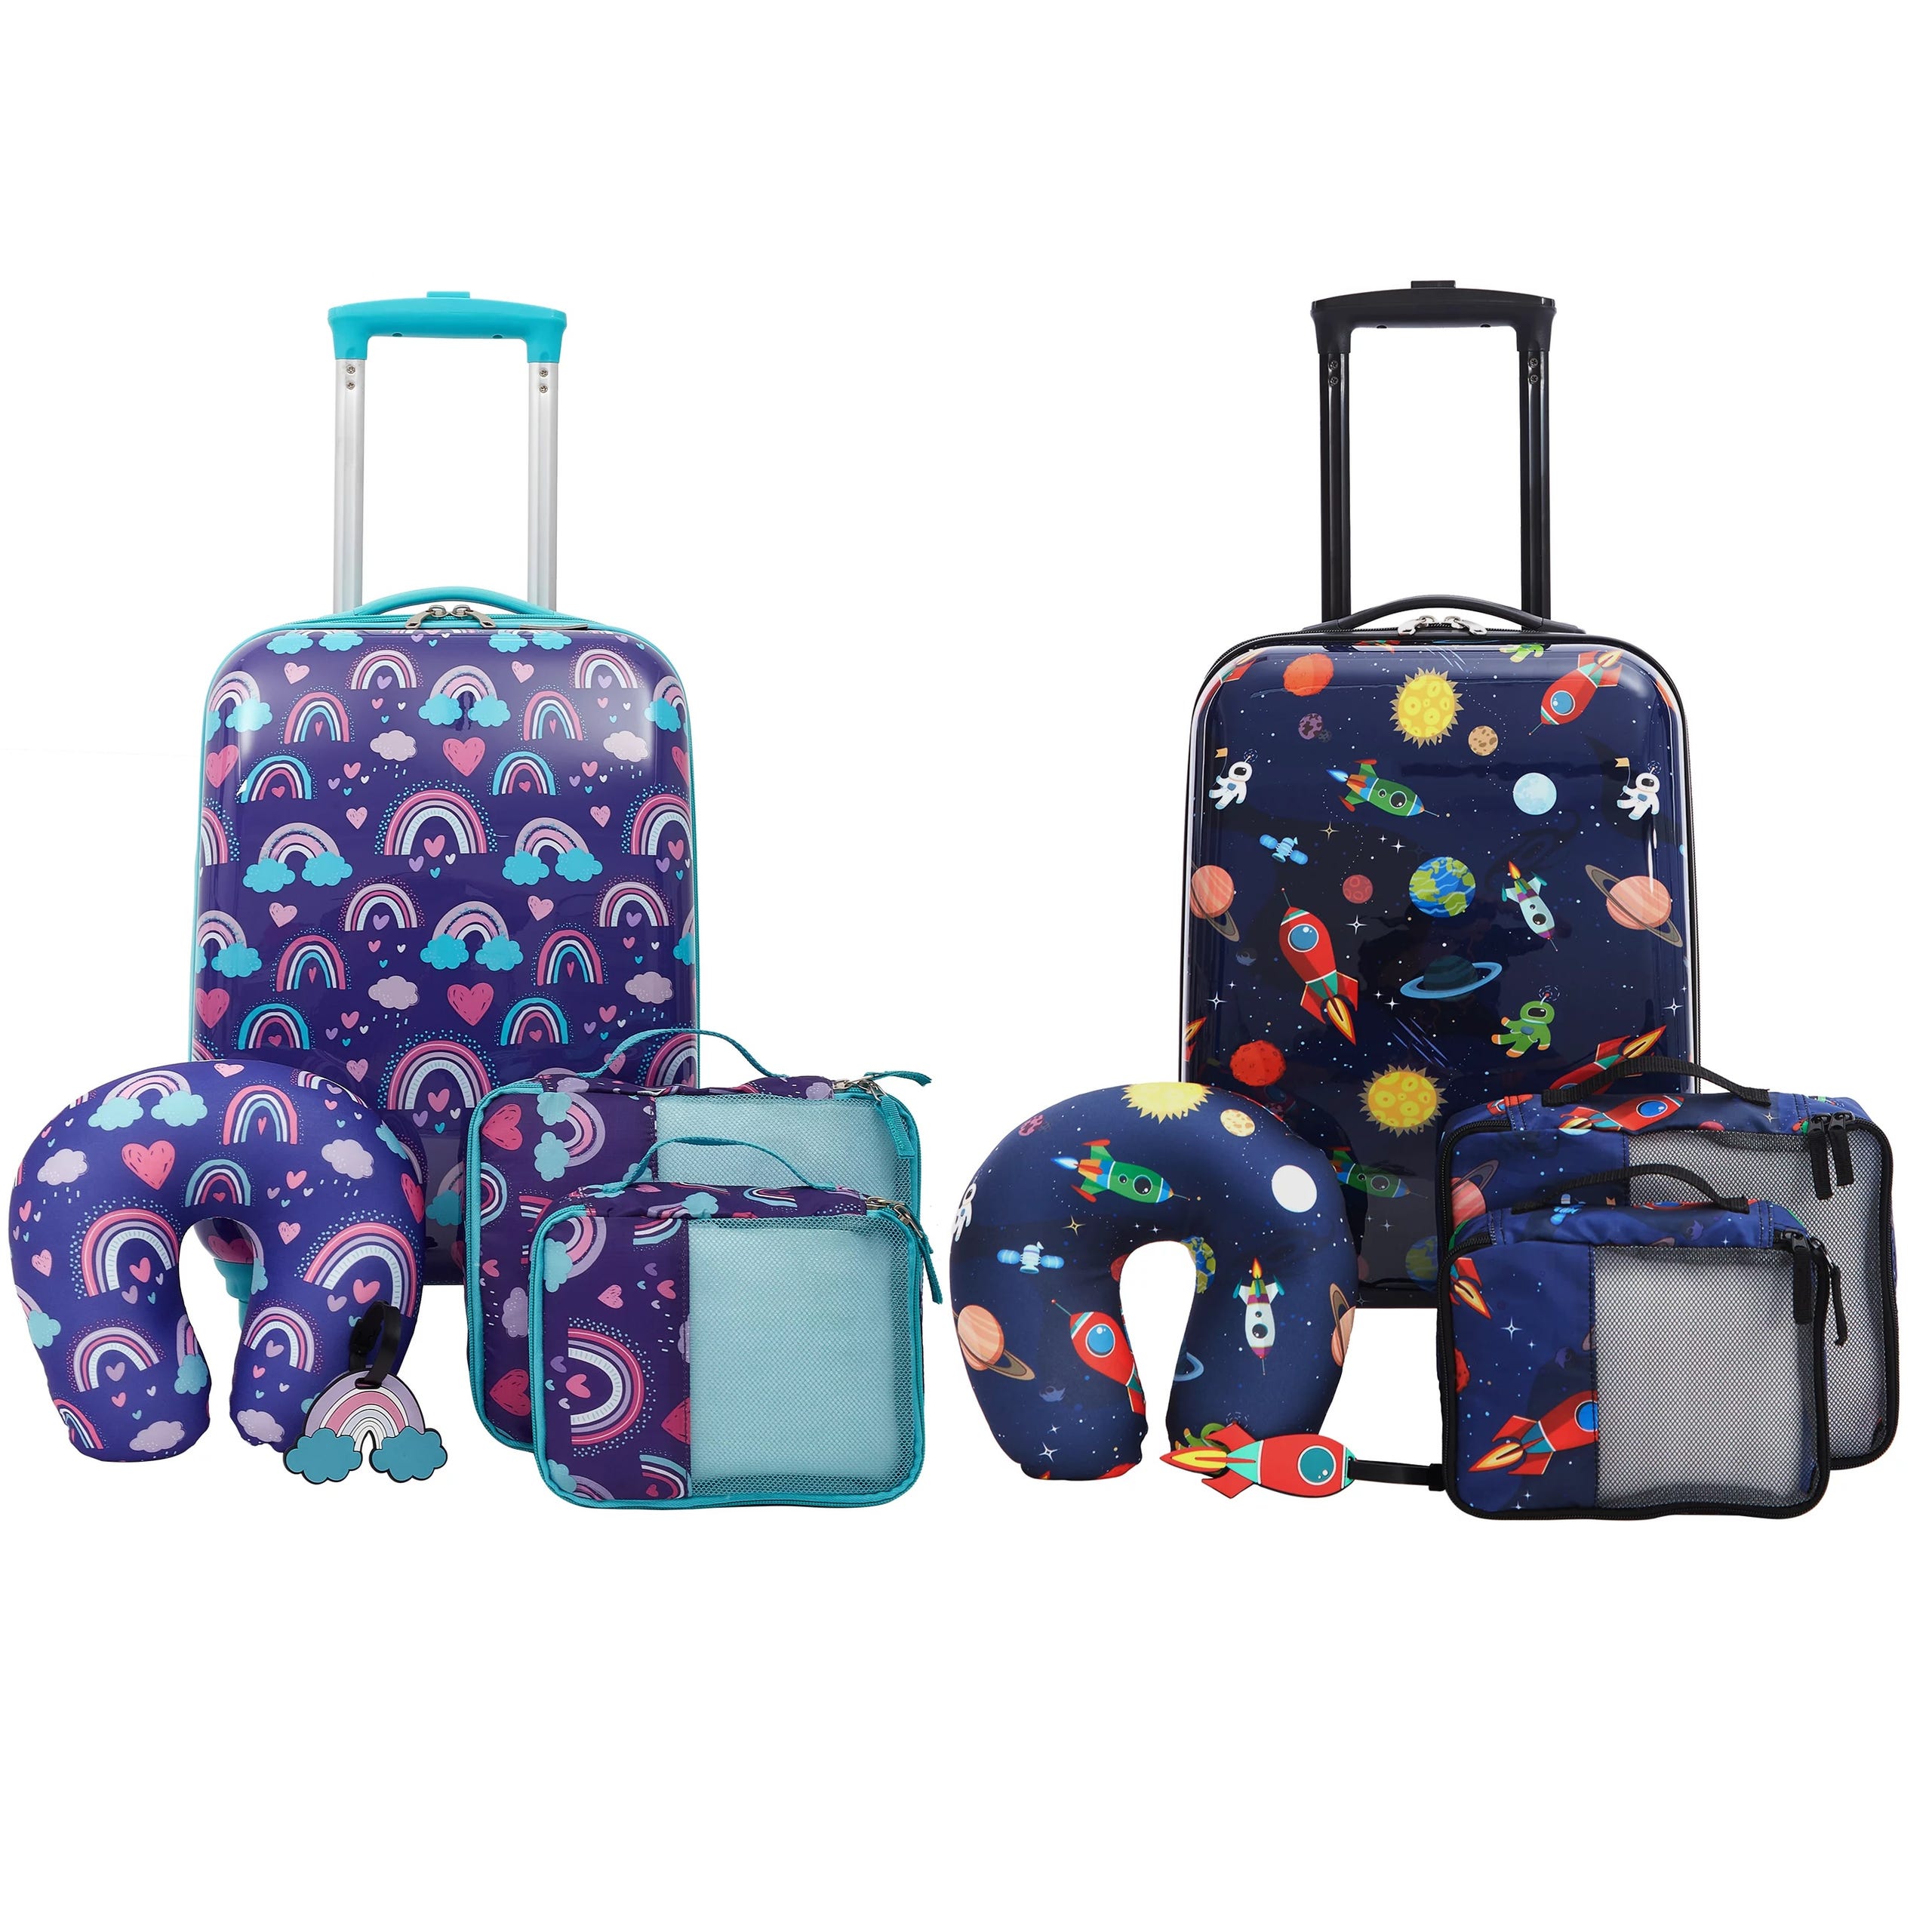 Two sets of children's travel accessories with one designed in a rainbow theme and the other in a space theme, including suitcases, neck pillows, and organizer bags.